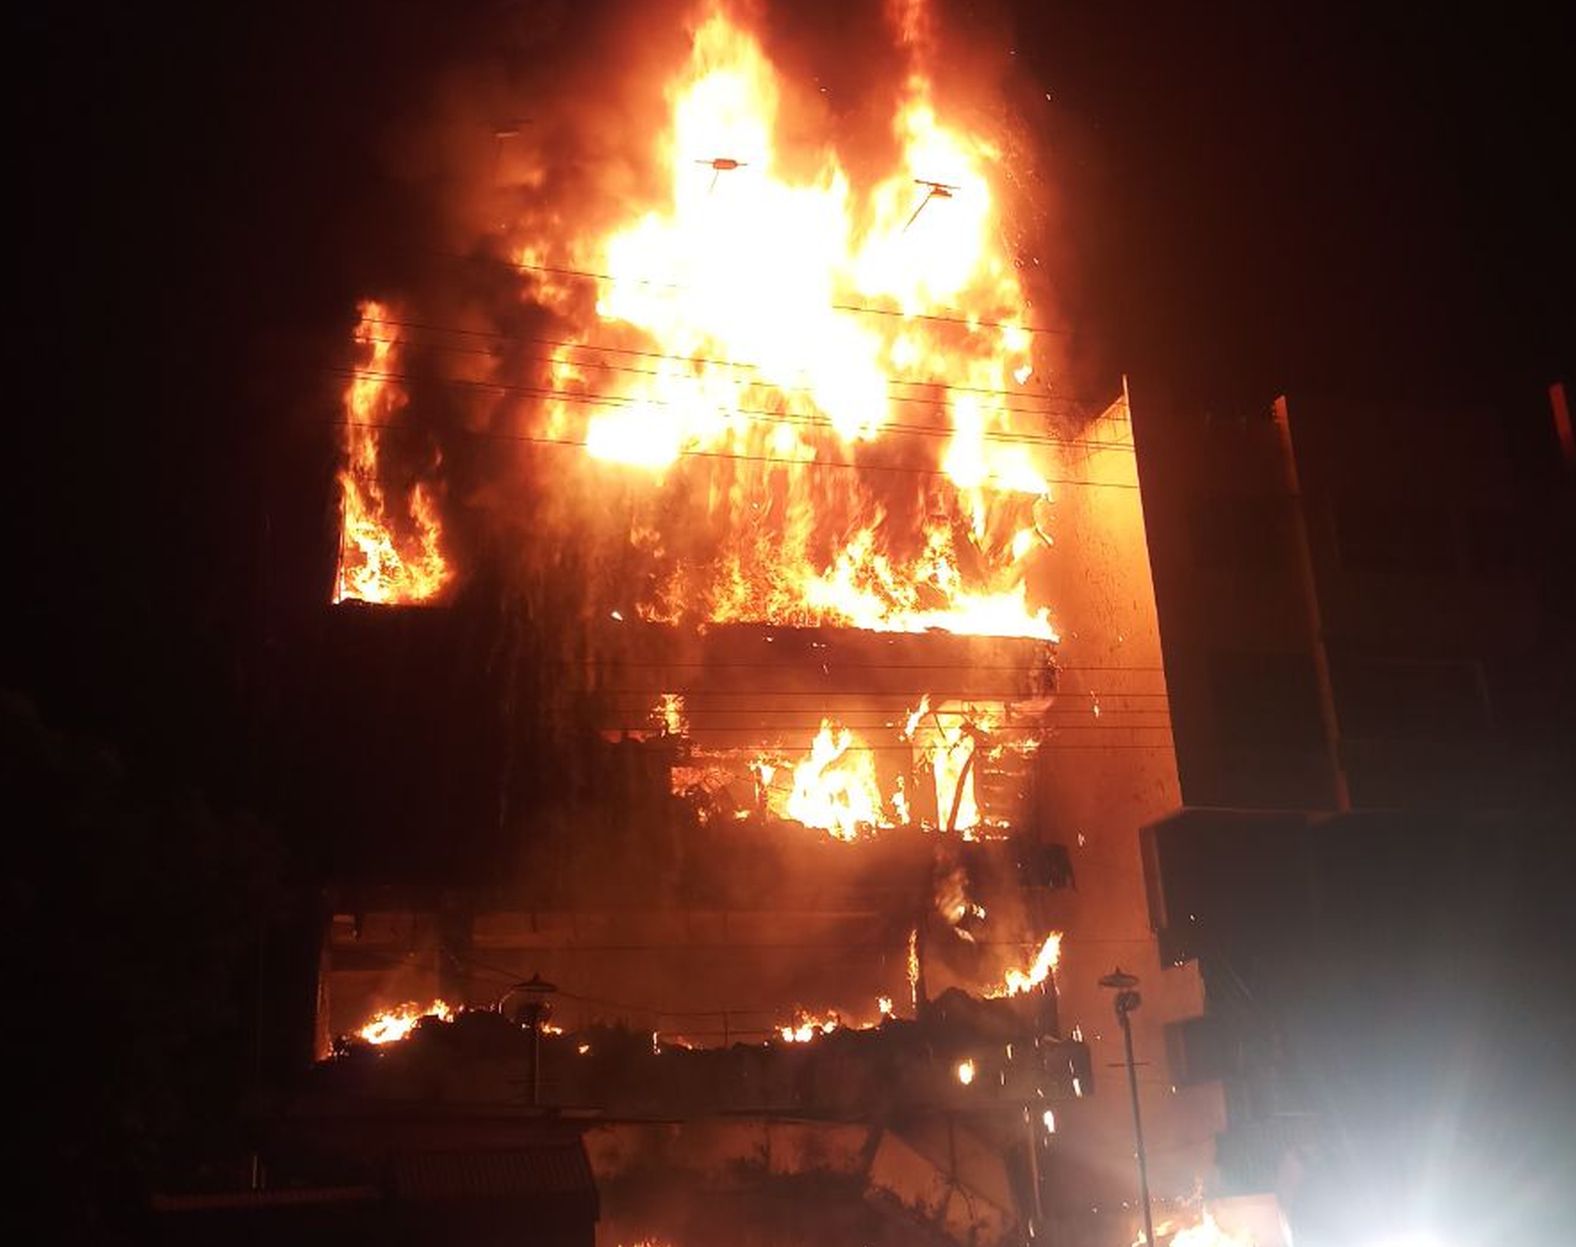 The gruesome fire in Pakija Mall, personnel working inside, jumped off the roof and saved them.